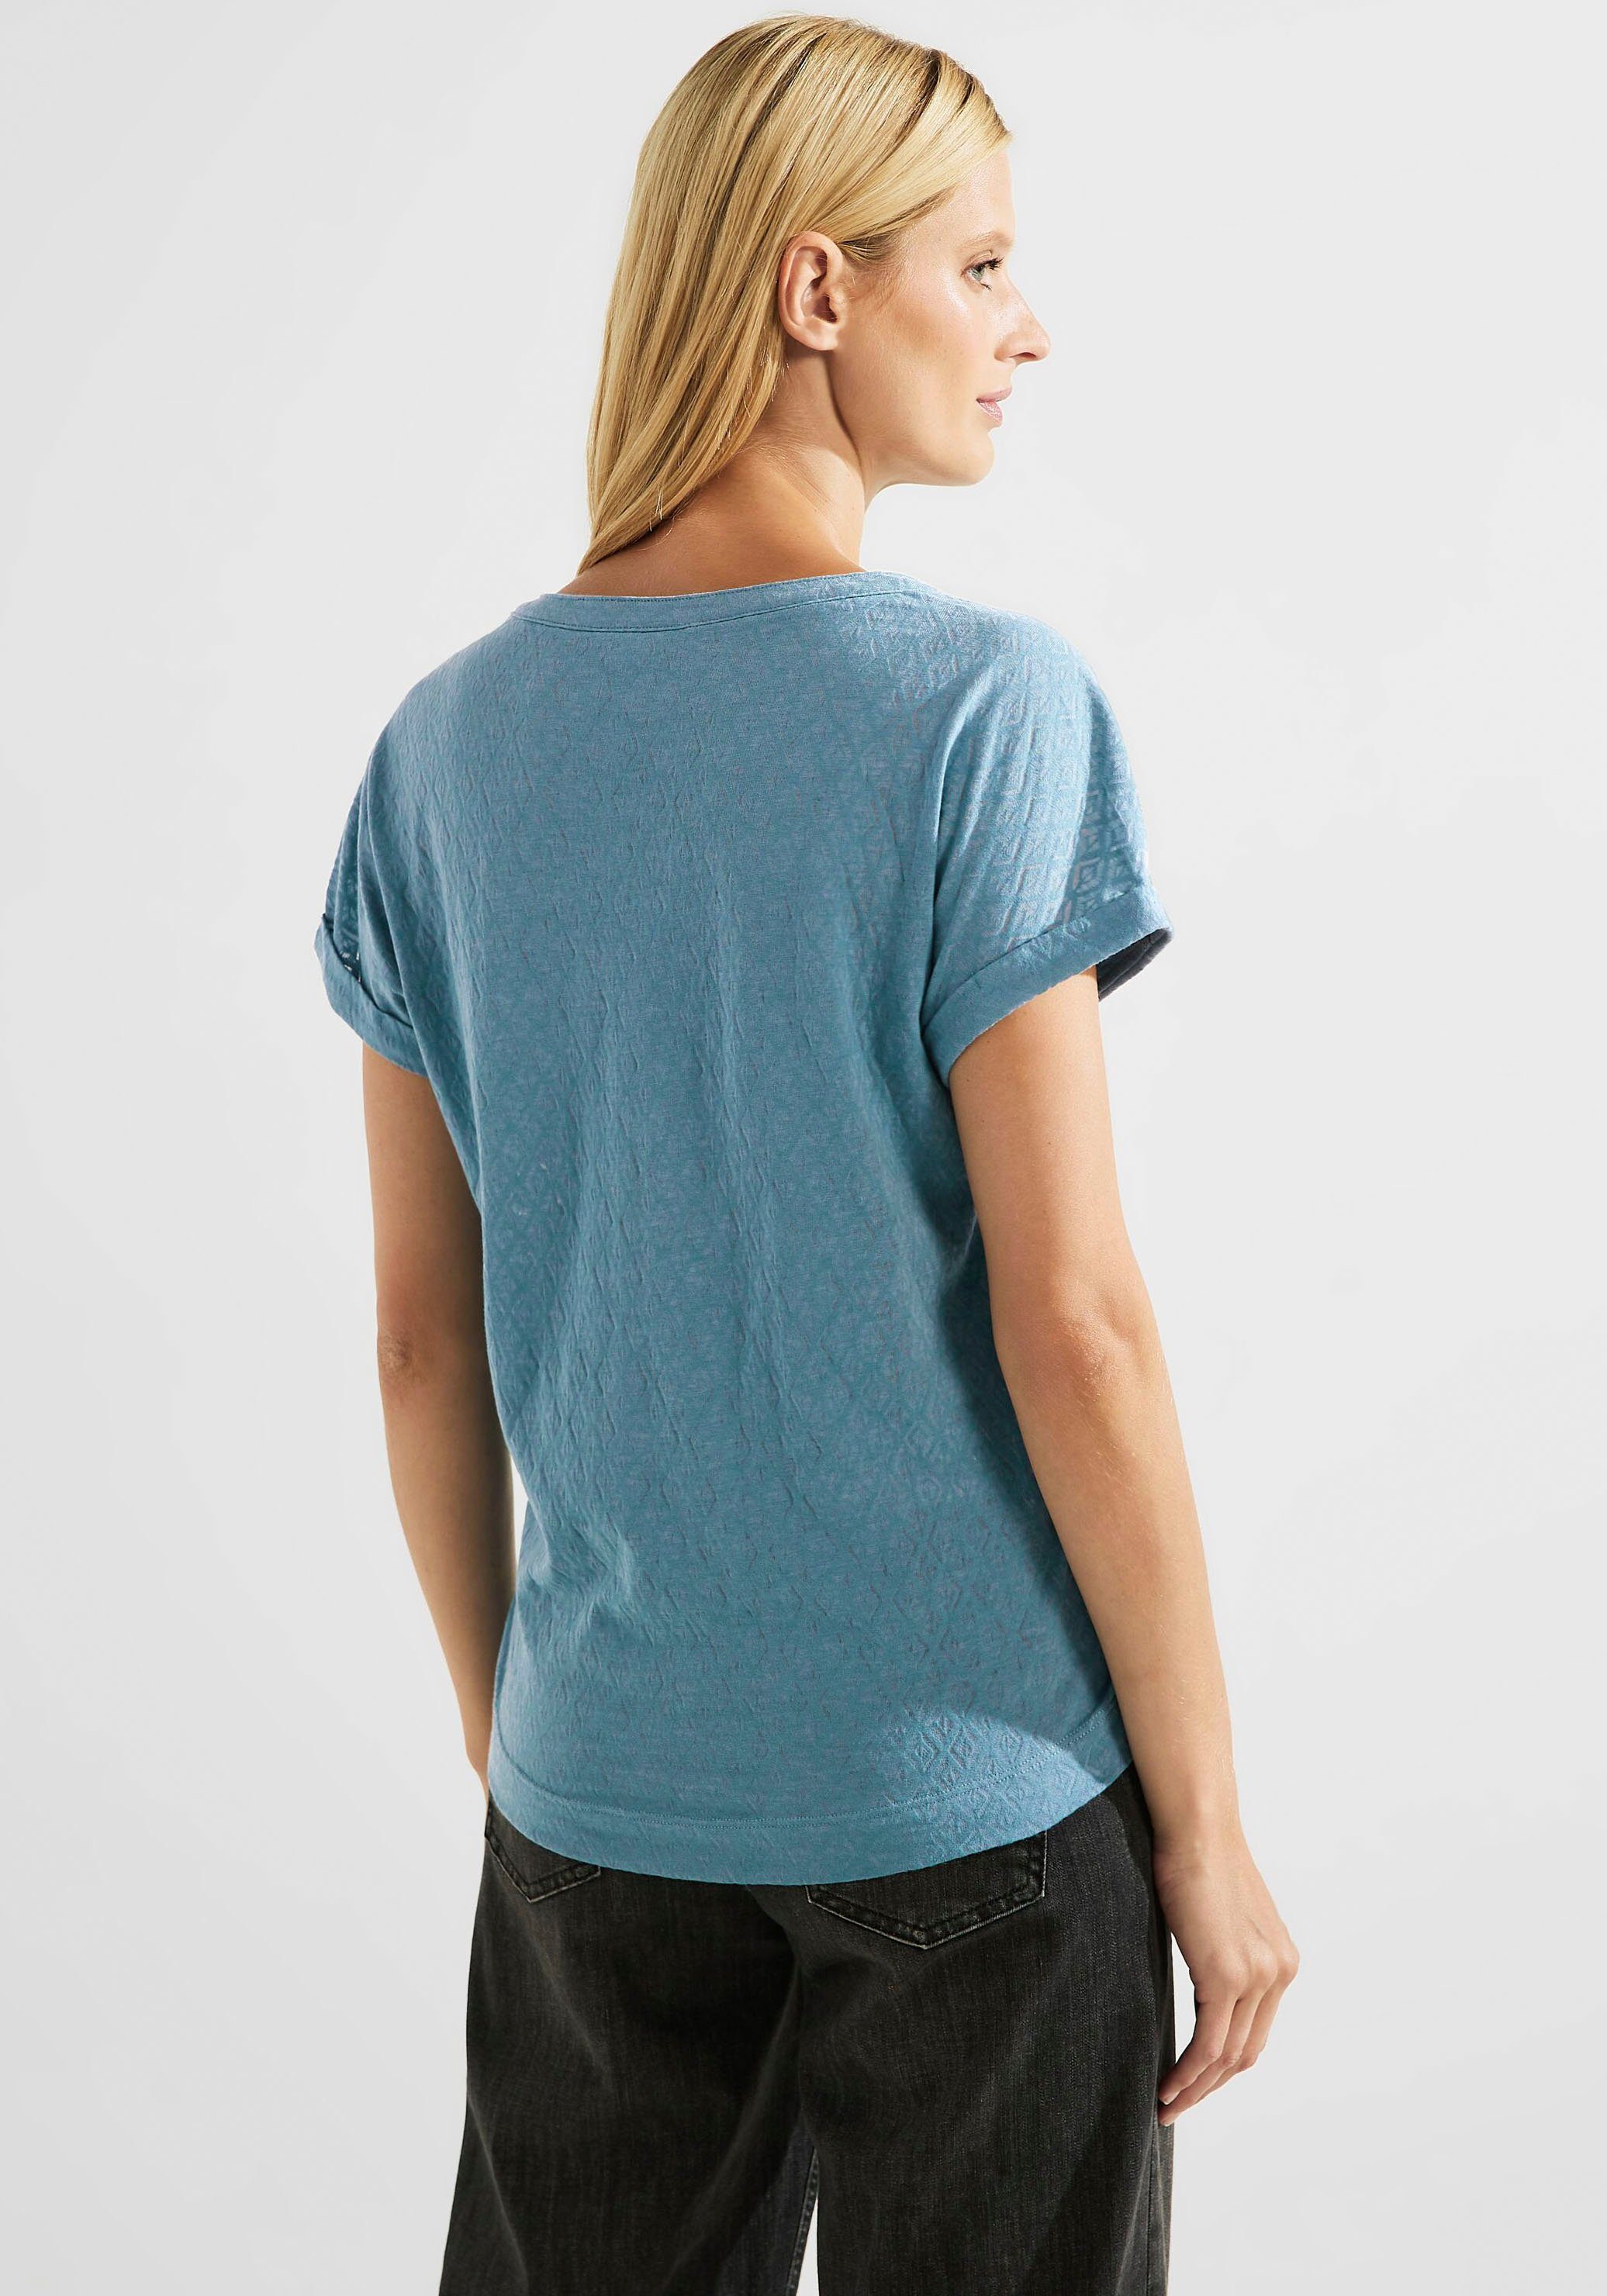 adriatic T-Shirt Allover-Muster Cecil mit in blue Rhombusform